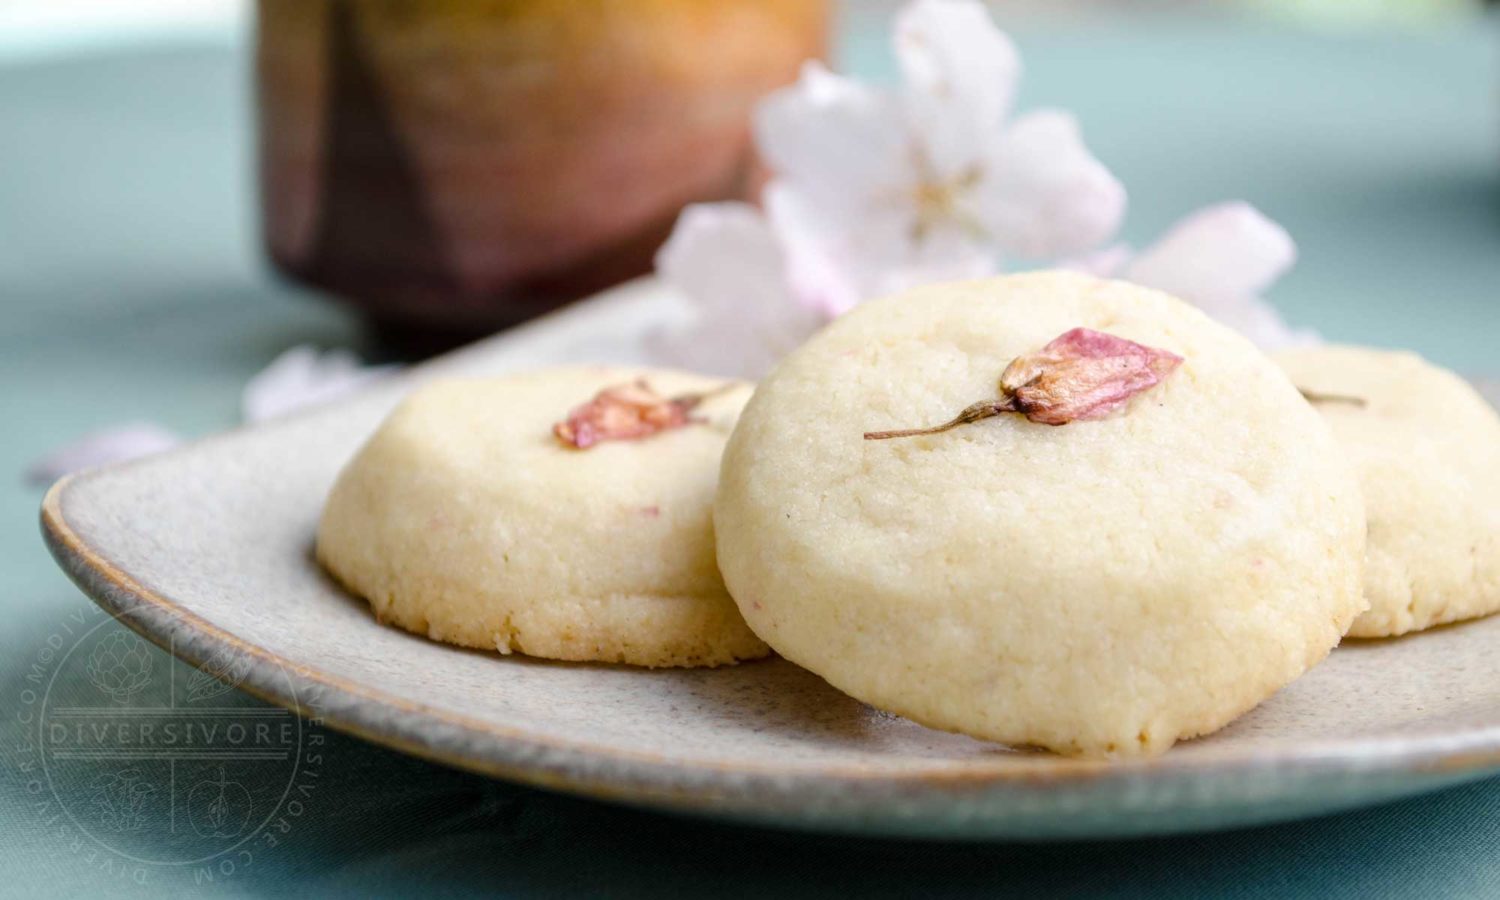 Sable shortbread cookies made with preserved cherry blossoms - Diversivore.com